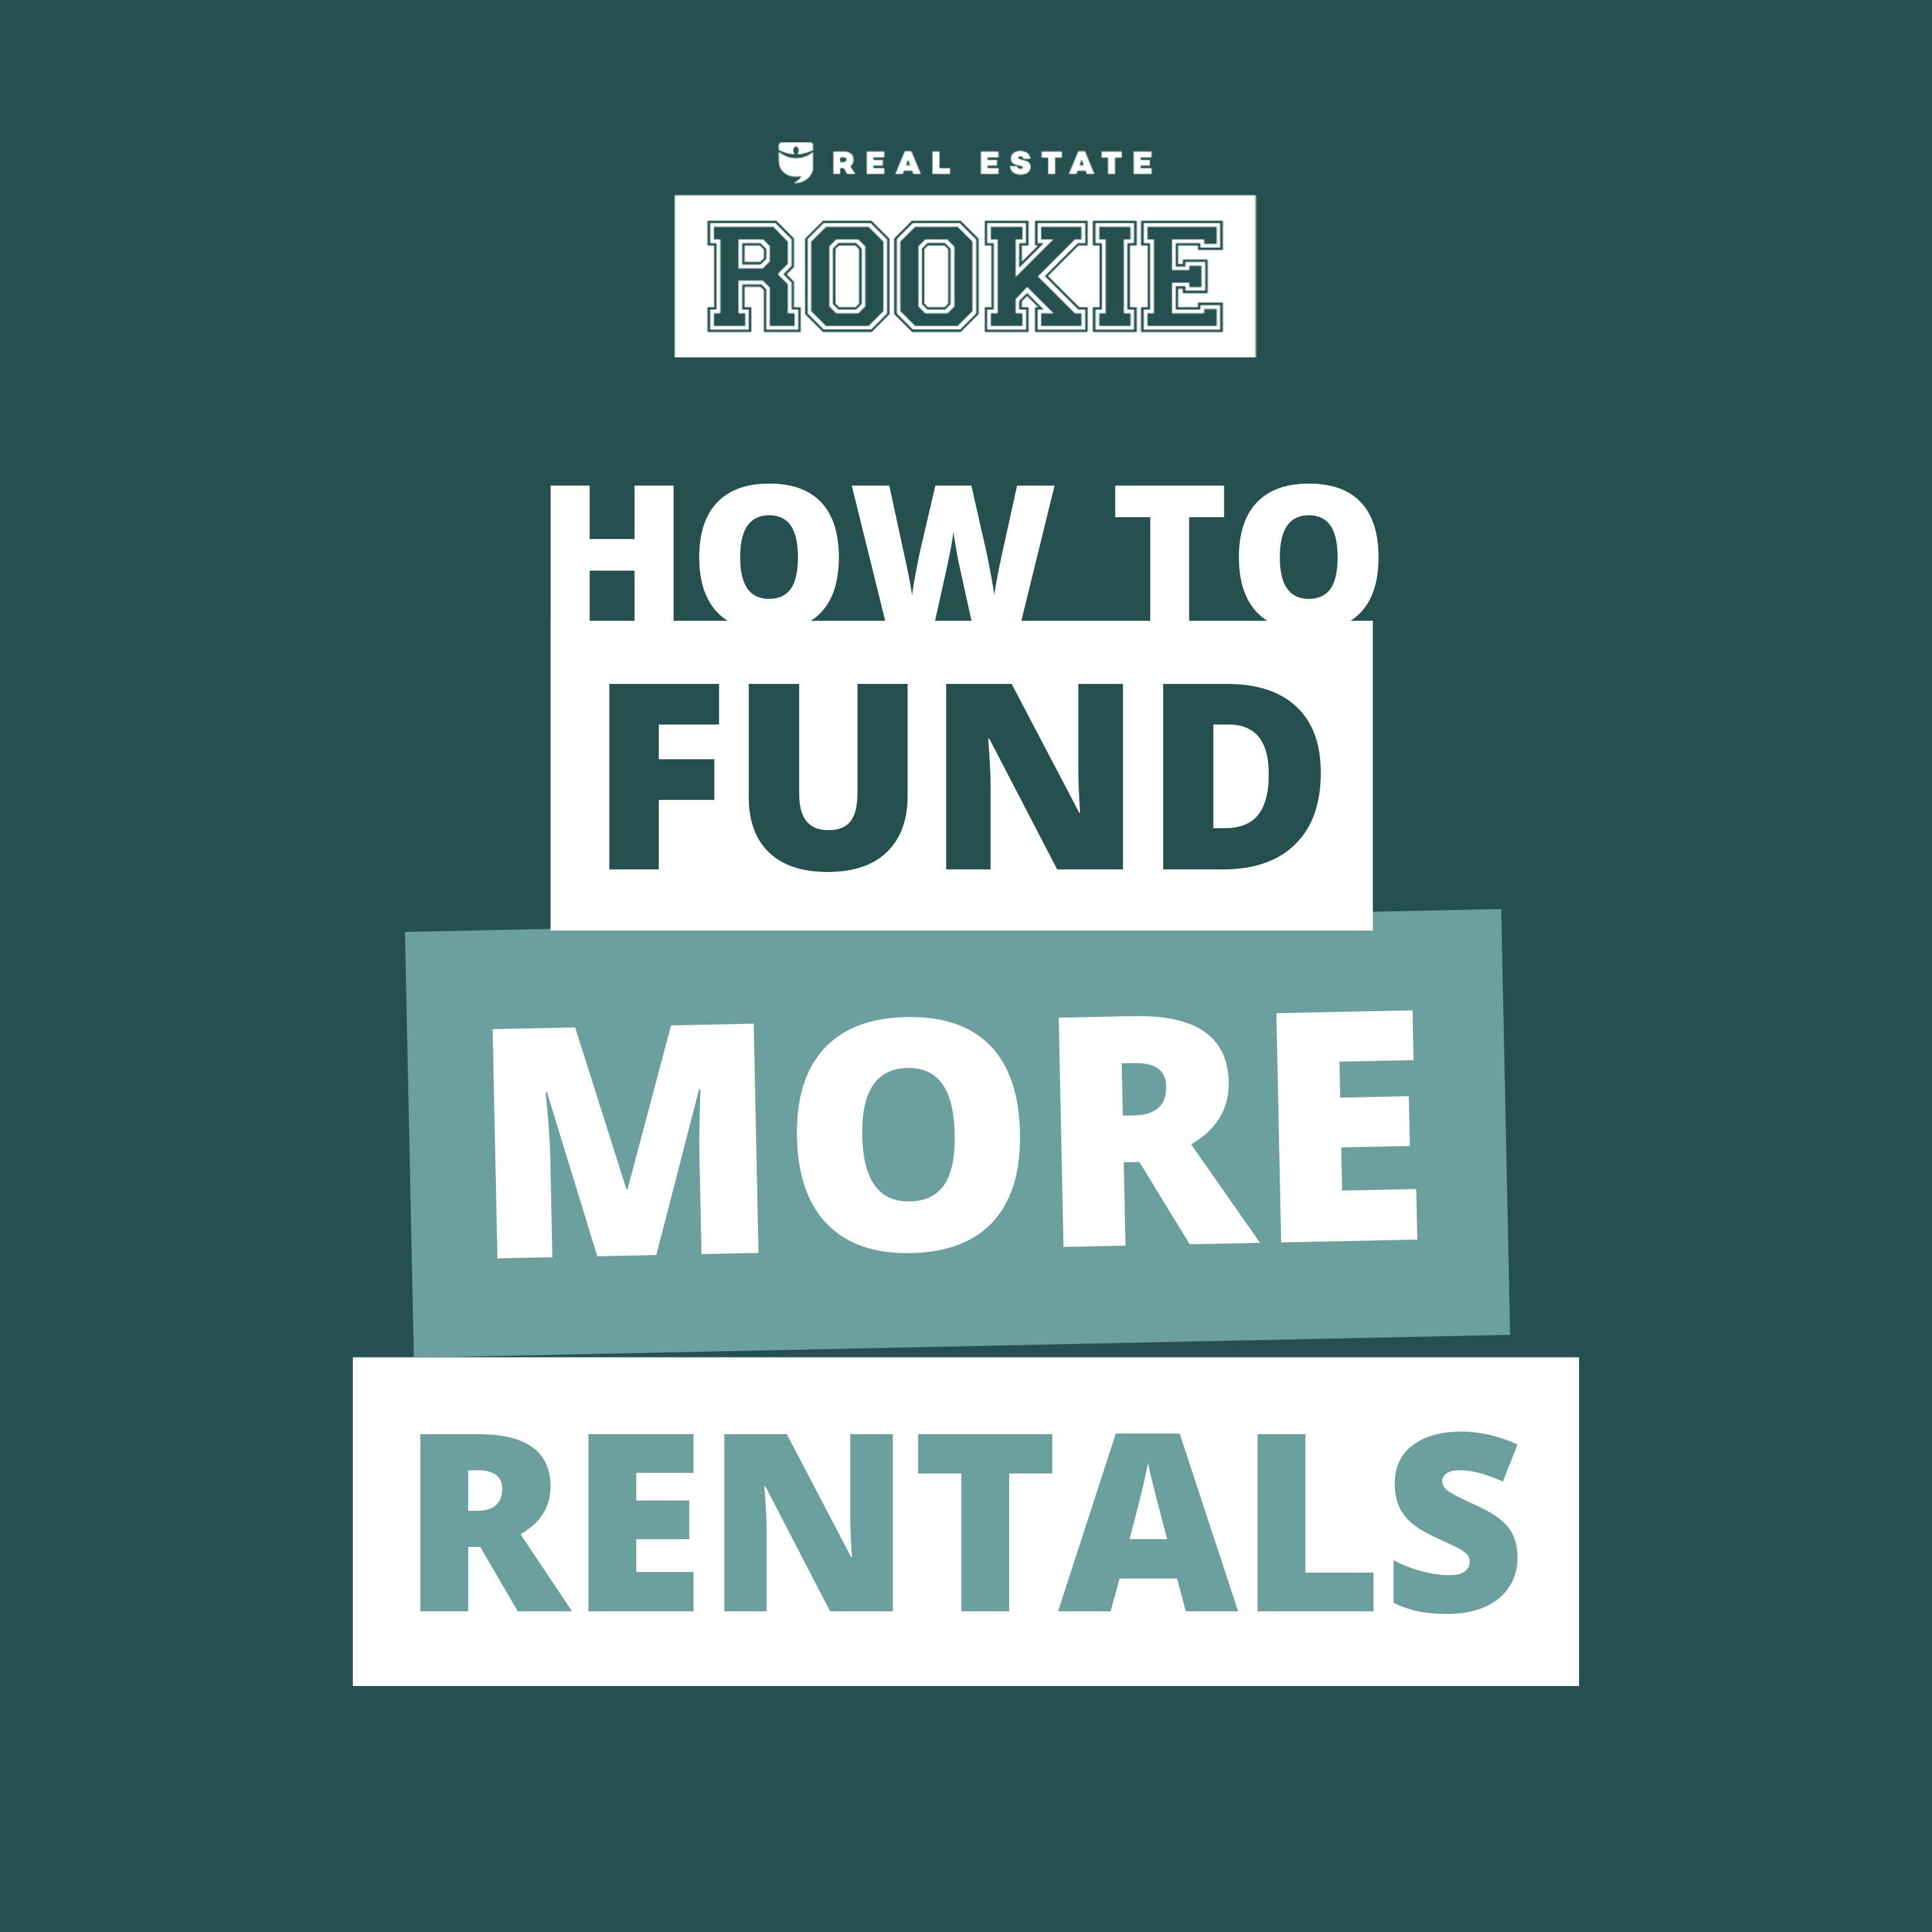 220: Rookie Reply: How to Buy Rentals Once You’ve Run Out of Cash